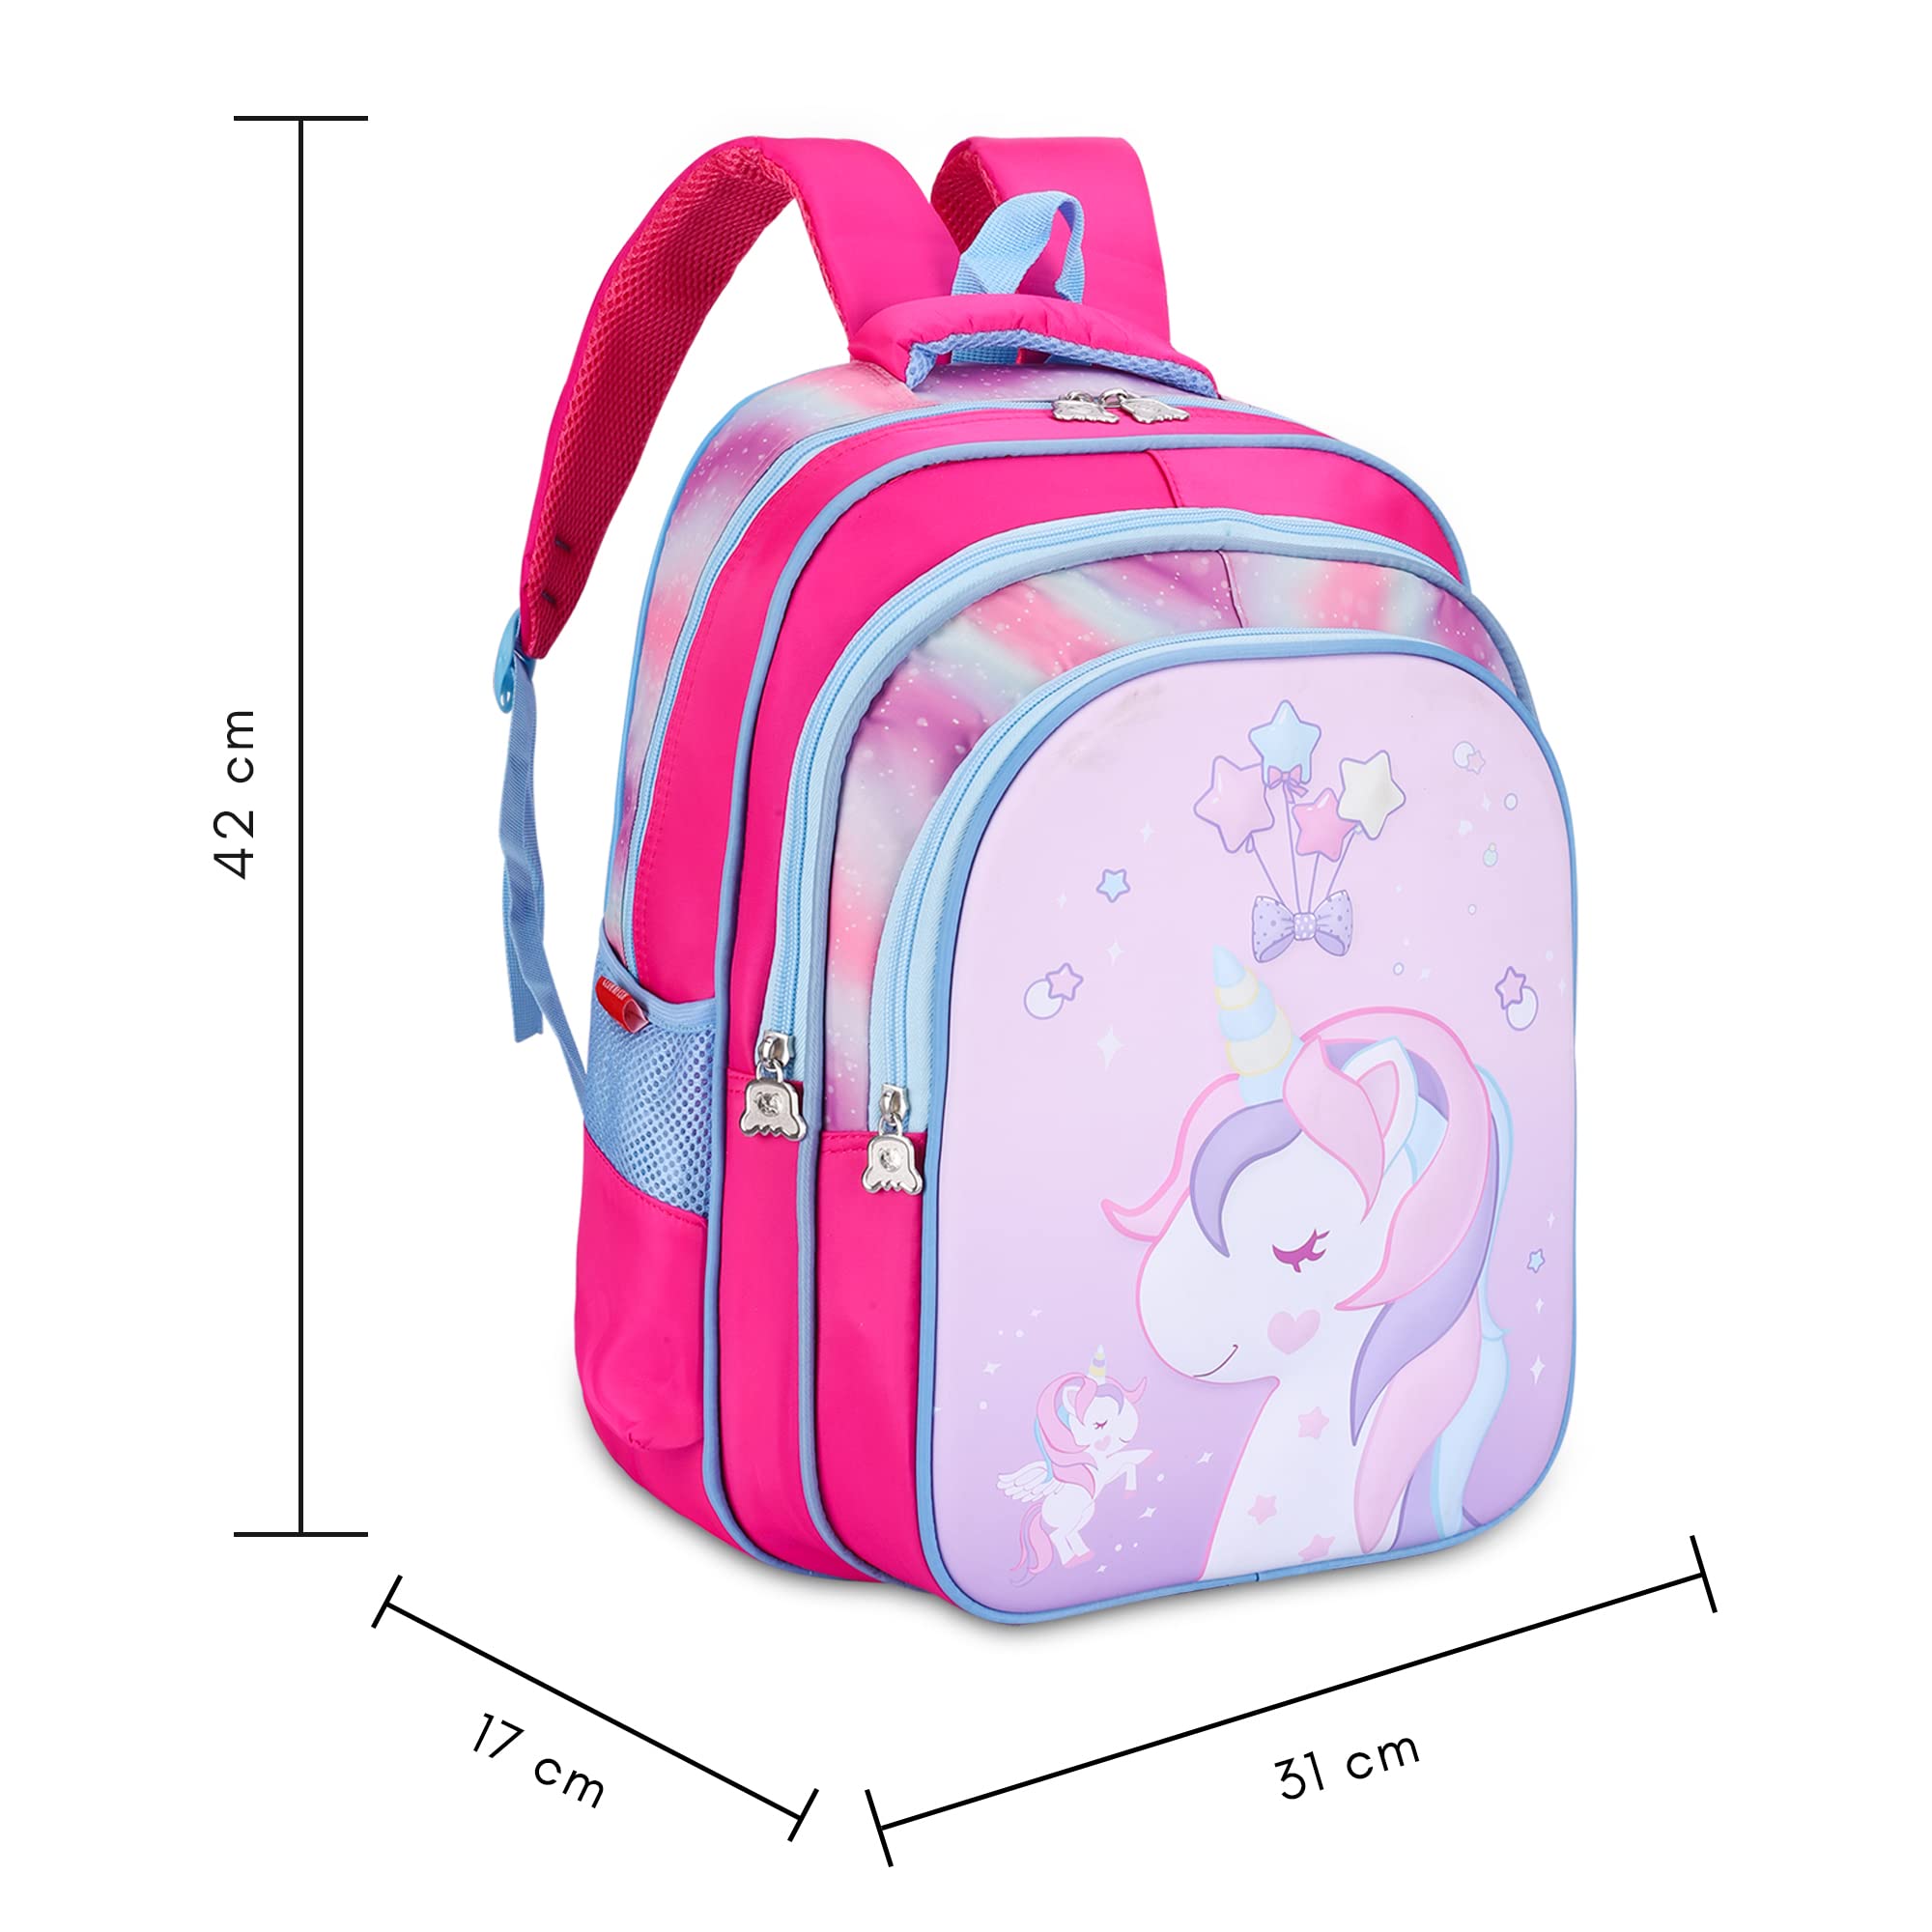 THE CLOWNFISH KidVenture Series Polyester 22 Litres Kids Backpack School Bag Daypack Sack Picnic Bag for Tiny Tots Child Age 5-7 years (Bubblegum Pink)